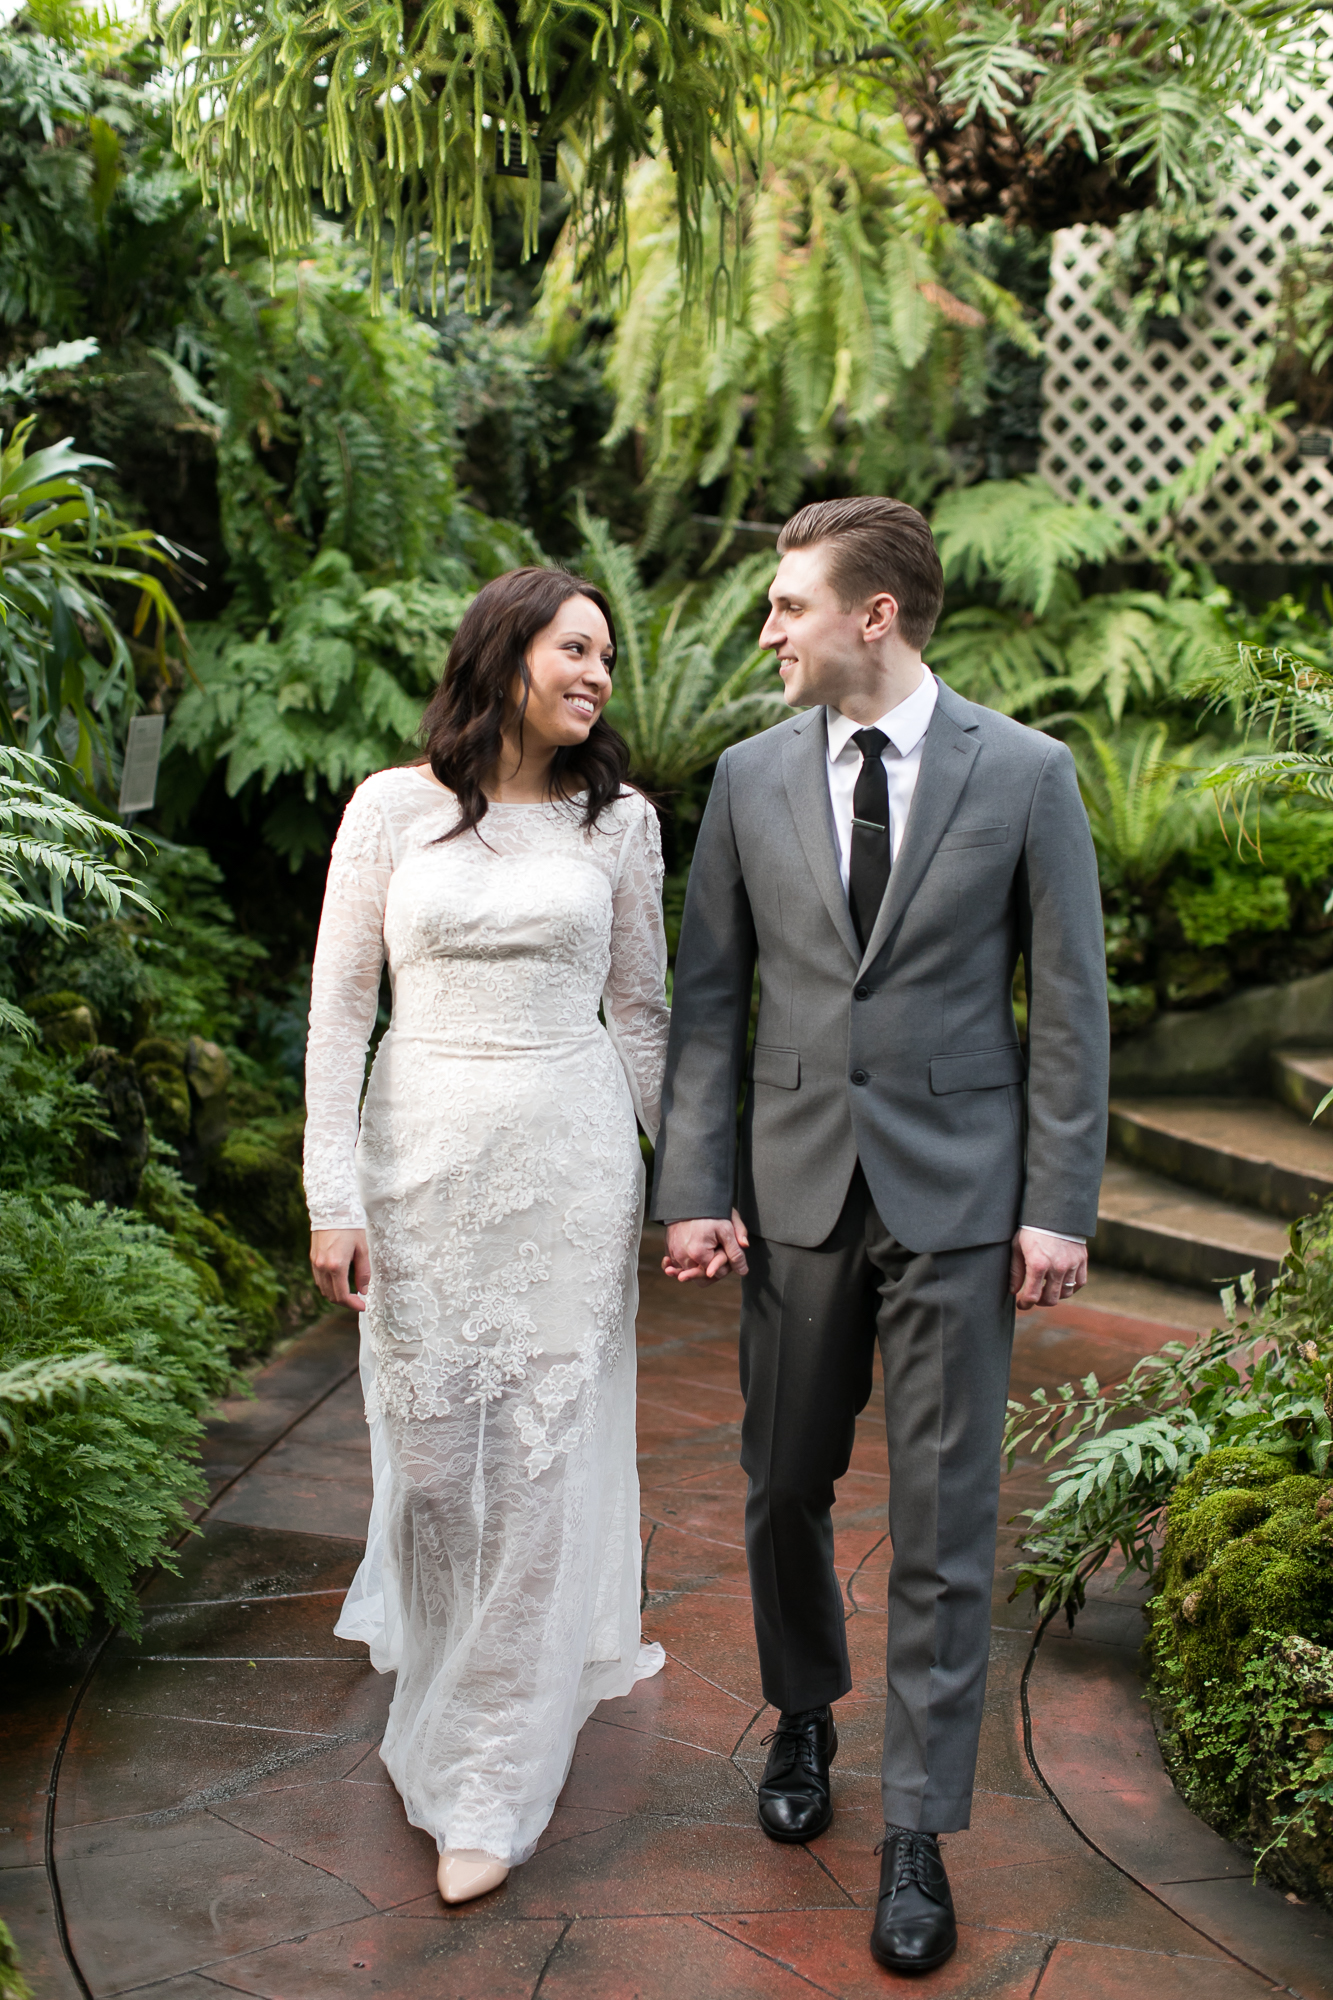 Lincoln Park Conservatory Wedding Photographer